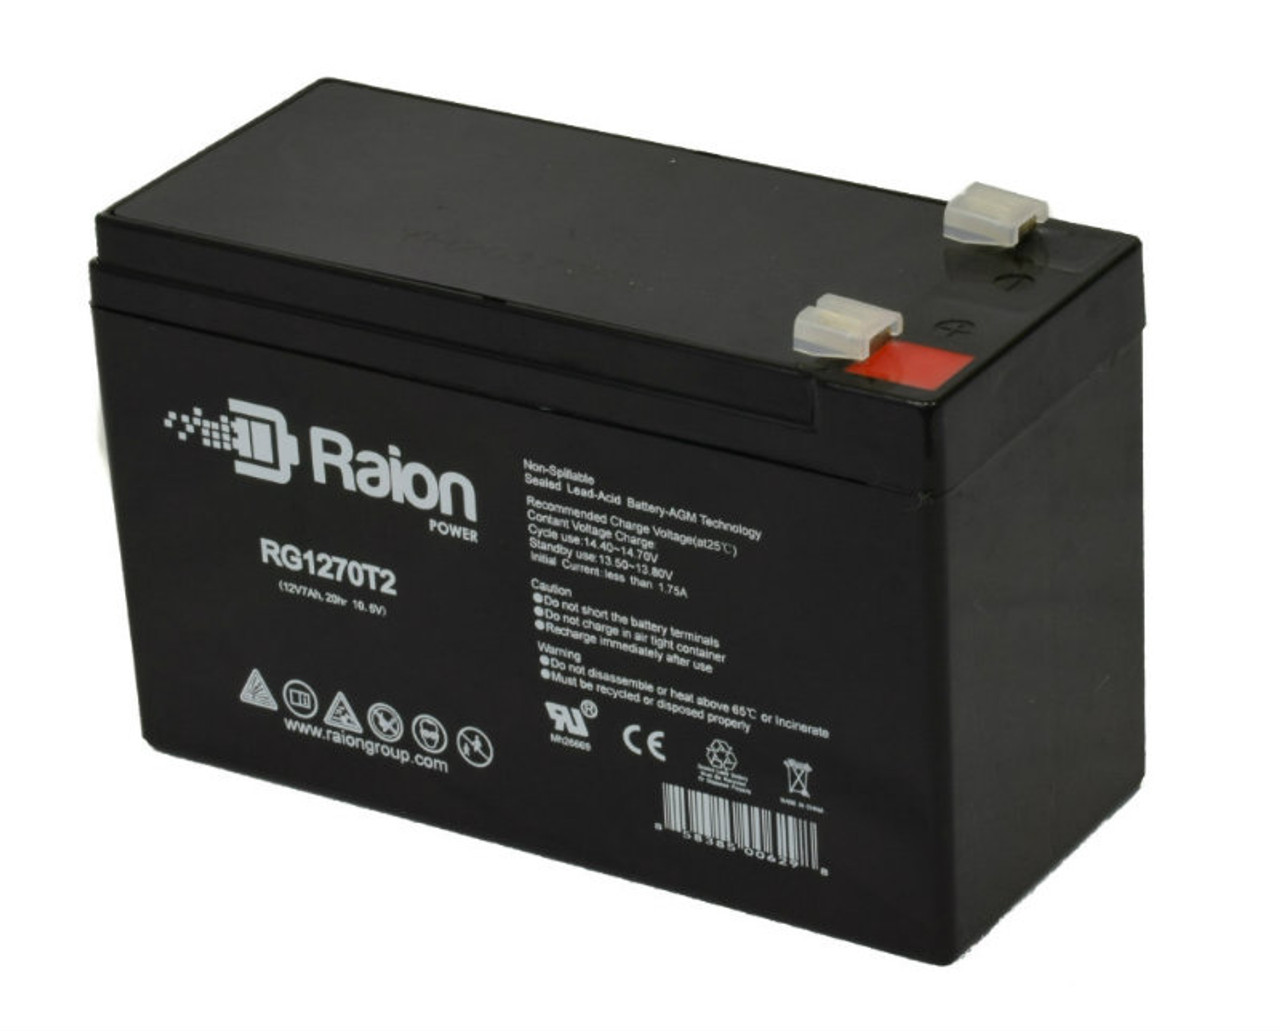 Raion Power RG1270T2 12V 7Ah Rechargeable Battery for Handicare 2000 Outdoor Stairlift